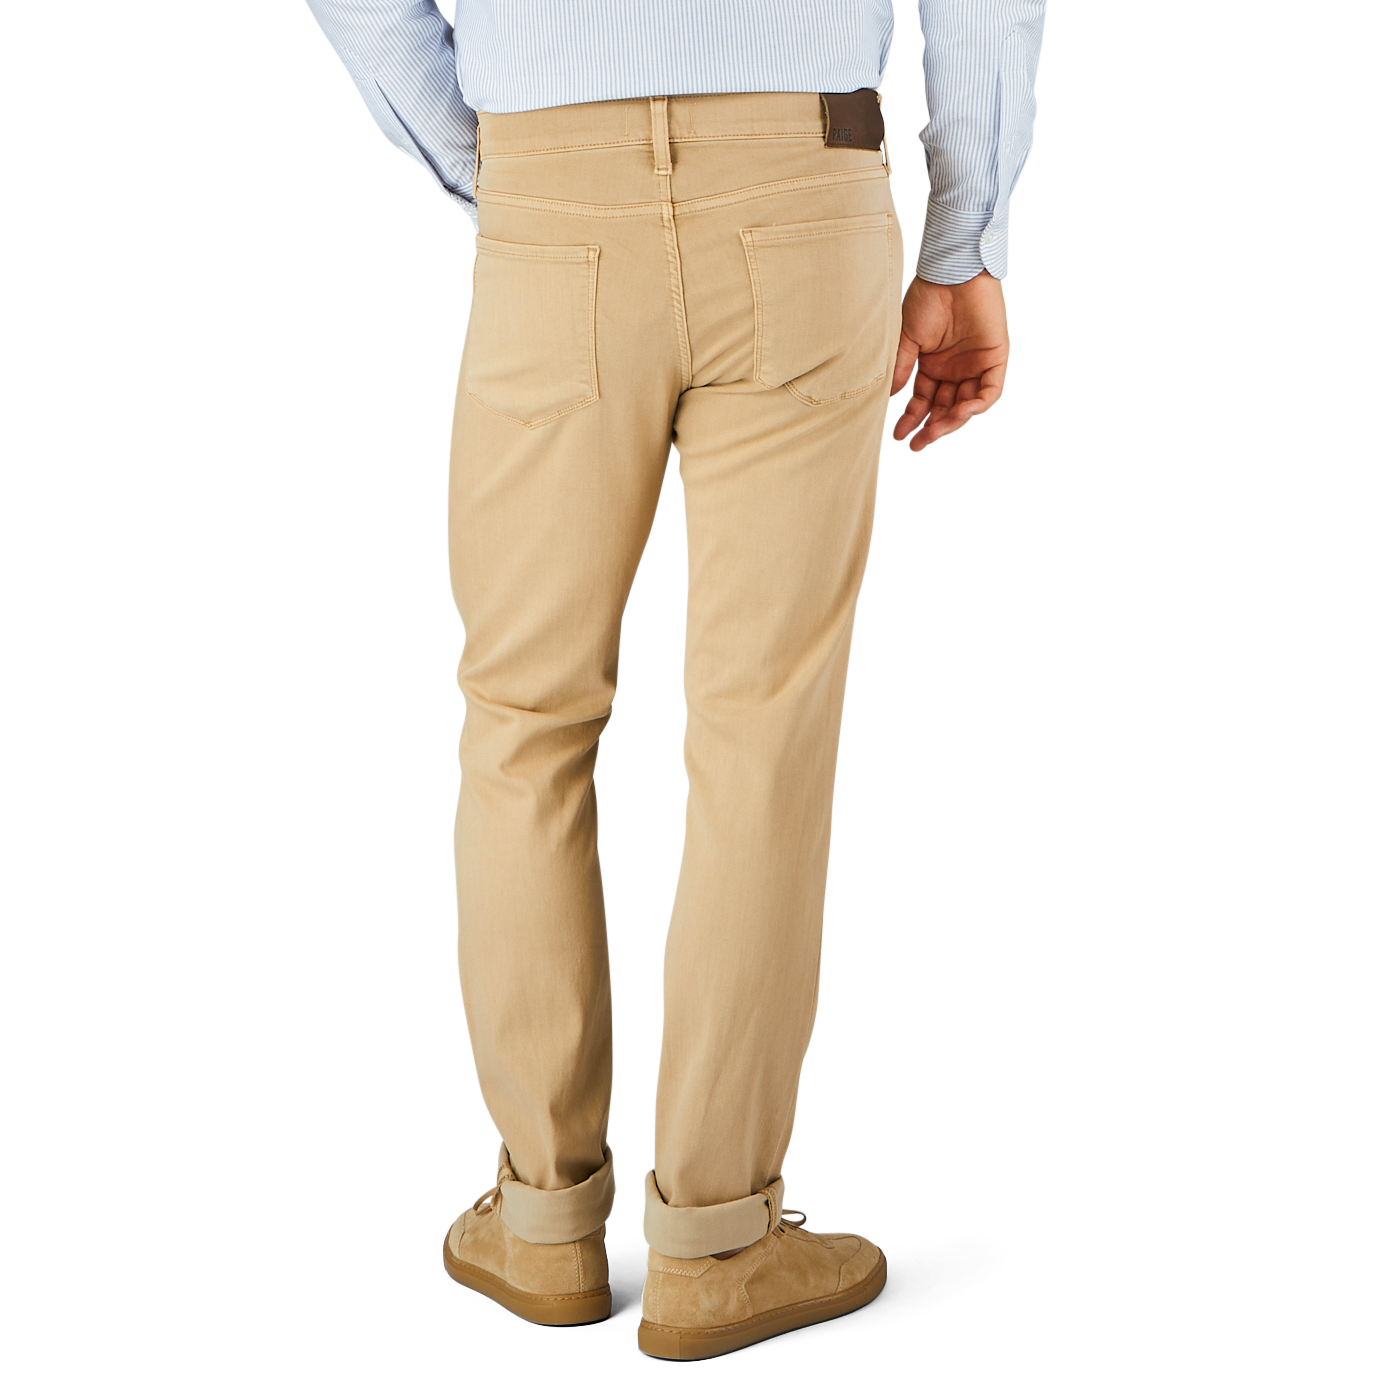 A person wearing beige pants with a comfortable fit and a light blue shirt is shown from the back. The Caramel Beige Cotton Transcend Federal Slim Jeans, possibly by Paige, have two back pockets. They are also wearing brown shoes.